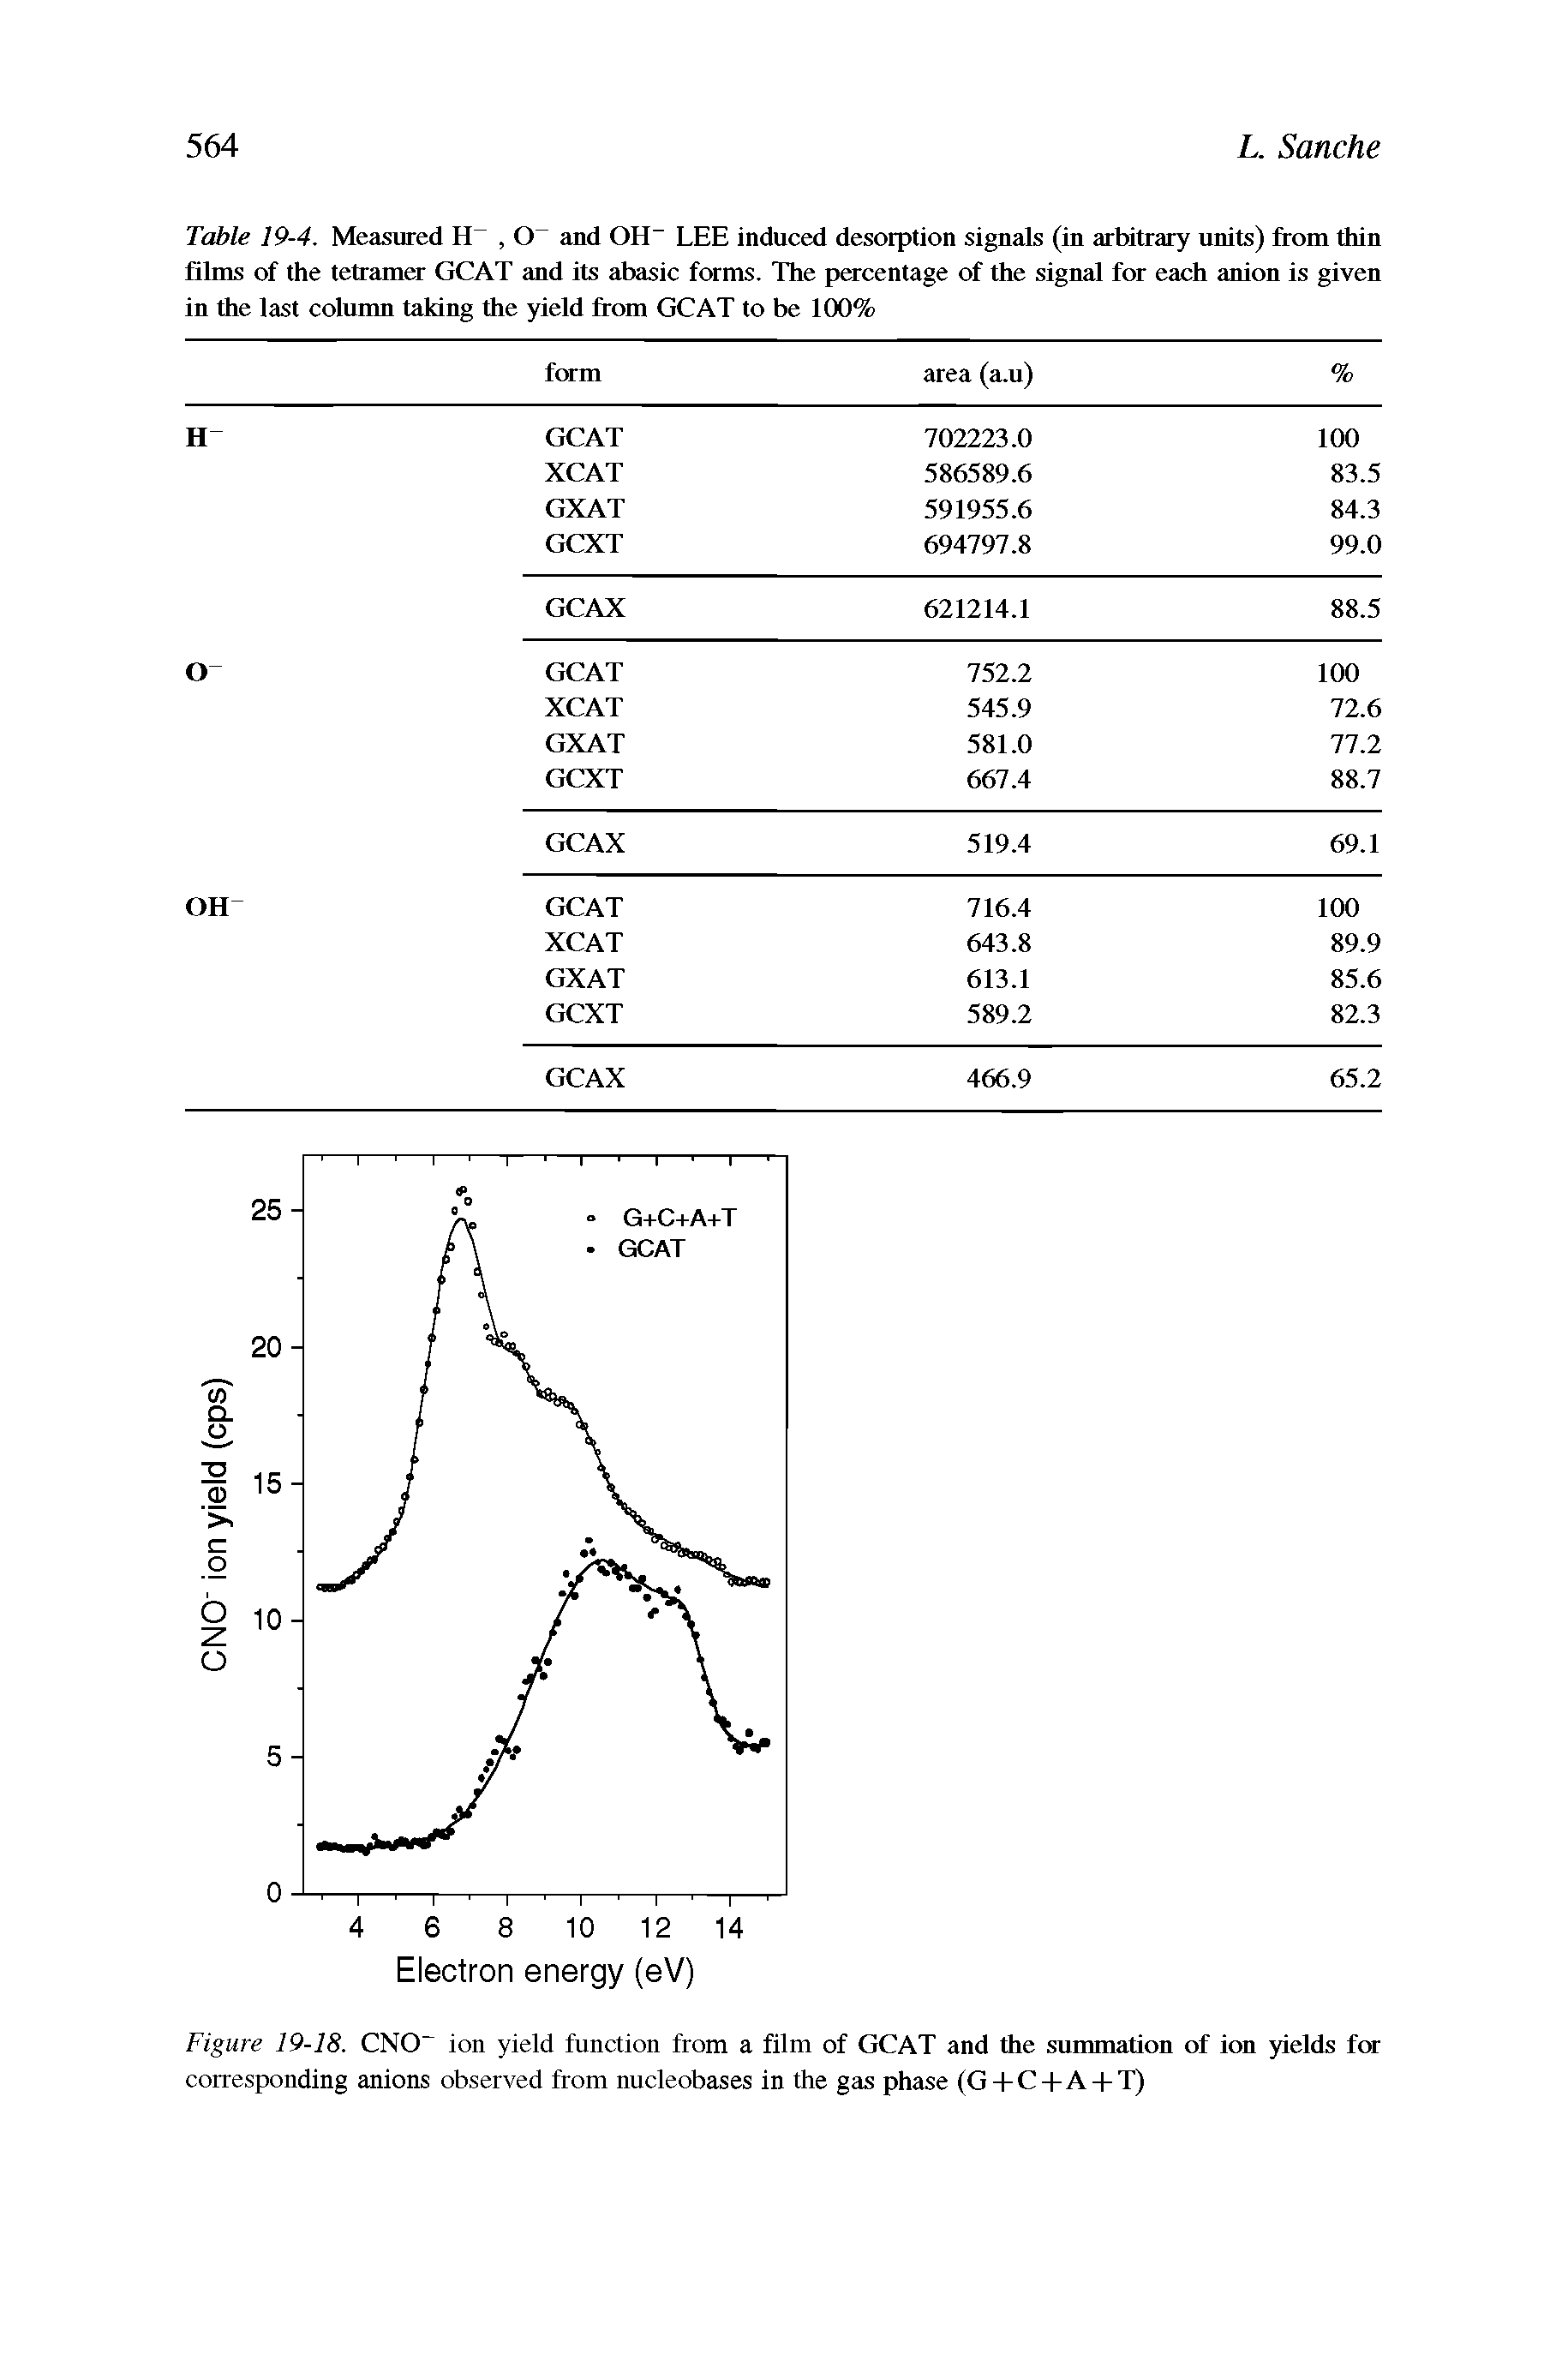 Table 19-4. Measured II, () and OH- LEE induced desorption signals (in arbitrary units) from thin films of the tetramer GCAT and its abasic forms. The percentage of the signal for each anion is given in the last column taking the yield from GCAT to be 100%...